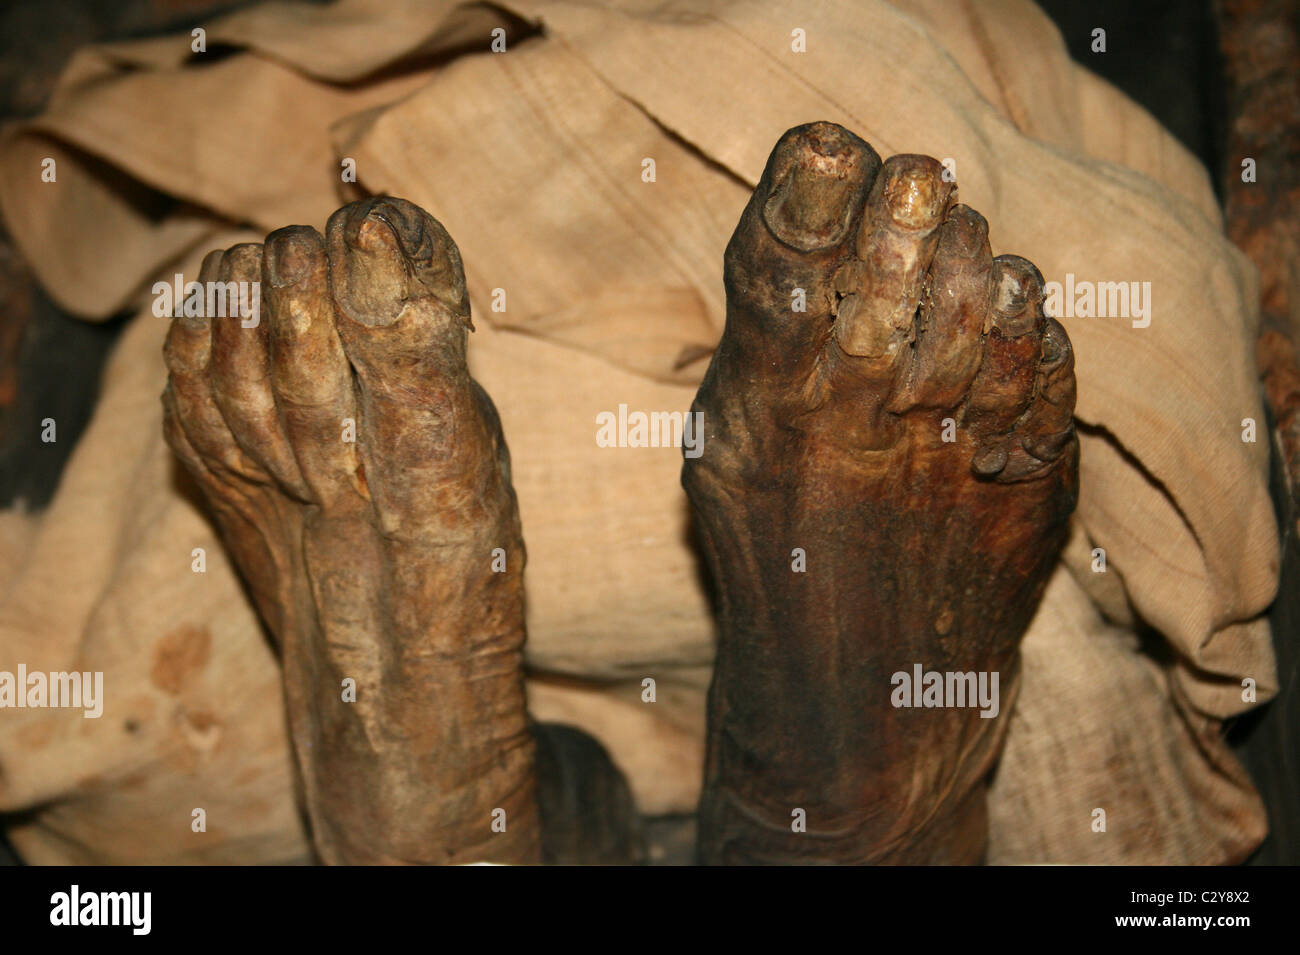 Mummified Feet Of Asru, A Temple Chantress From Thebes Taken At Manchester Museum, England, UK Stock Photo